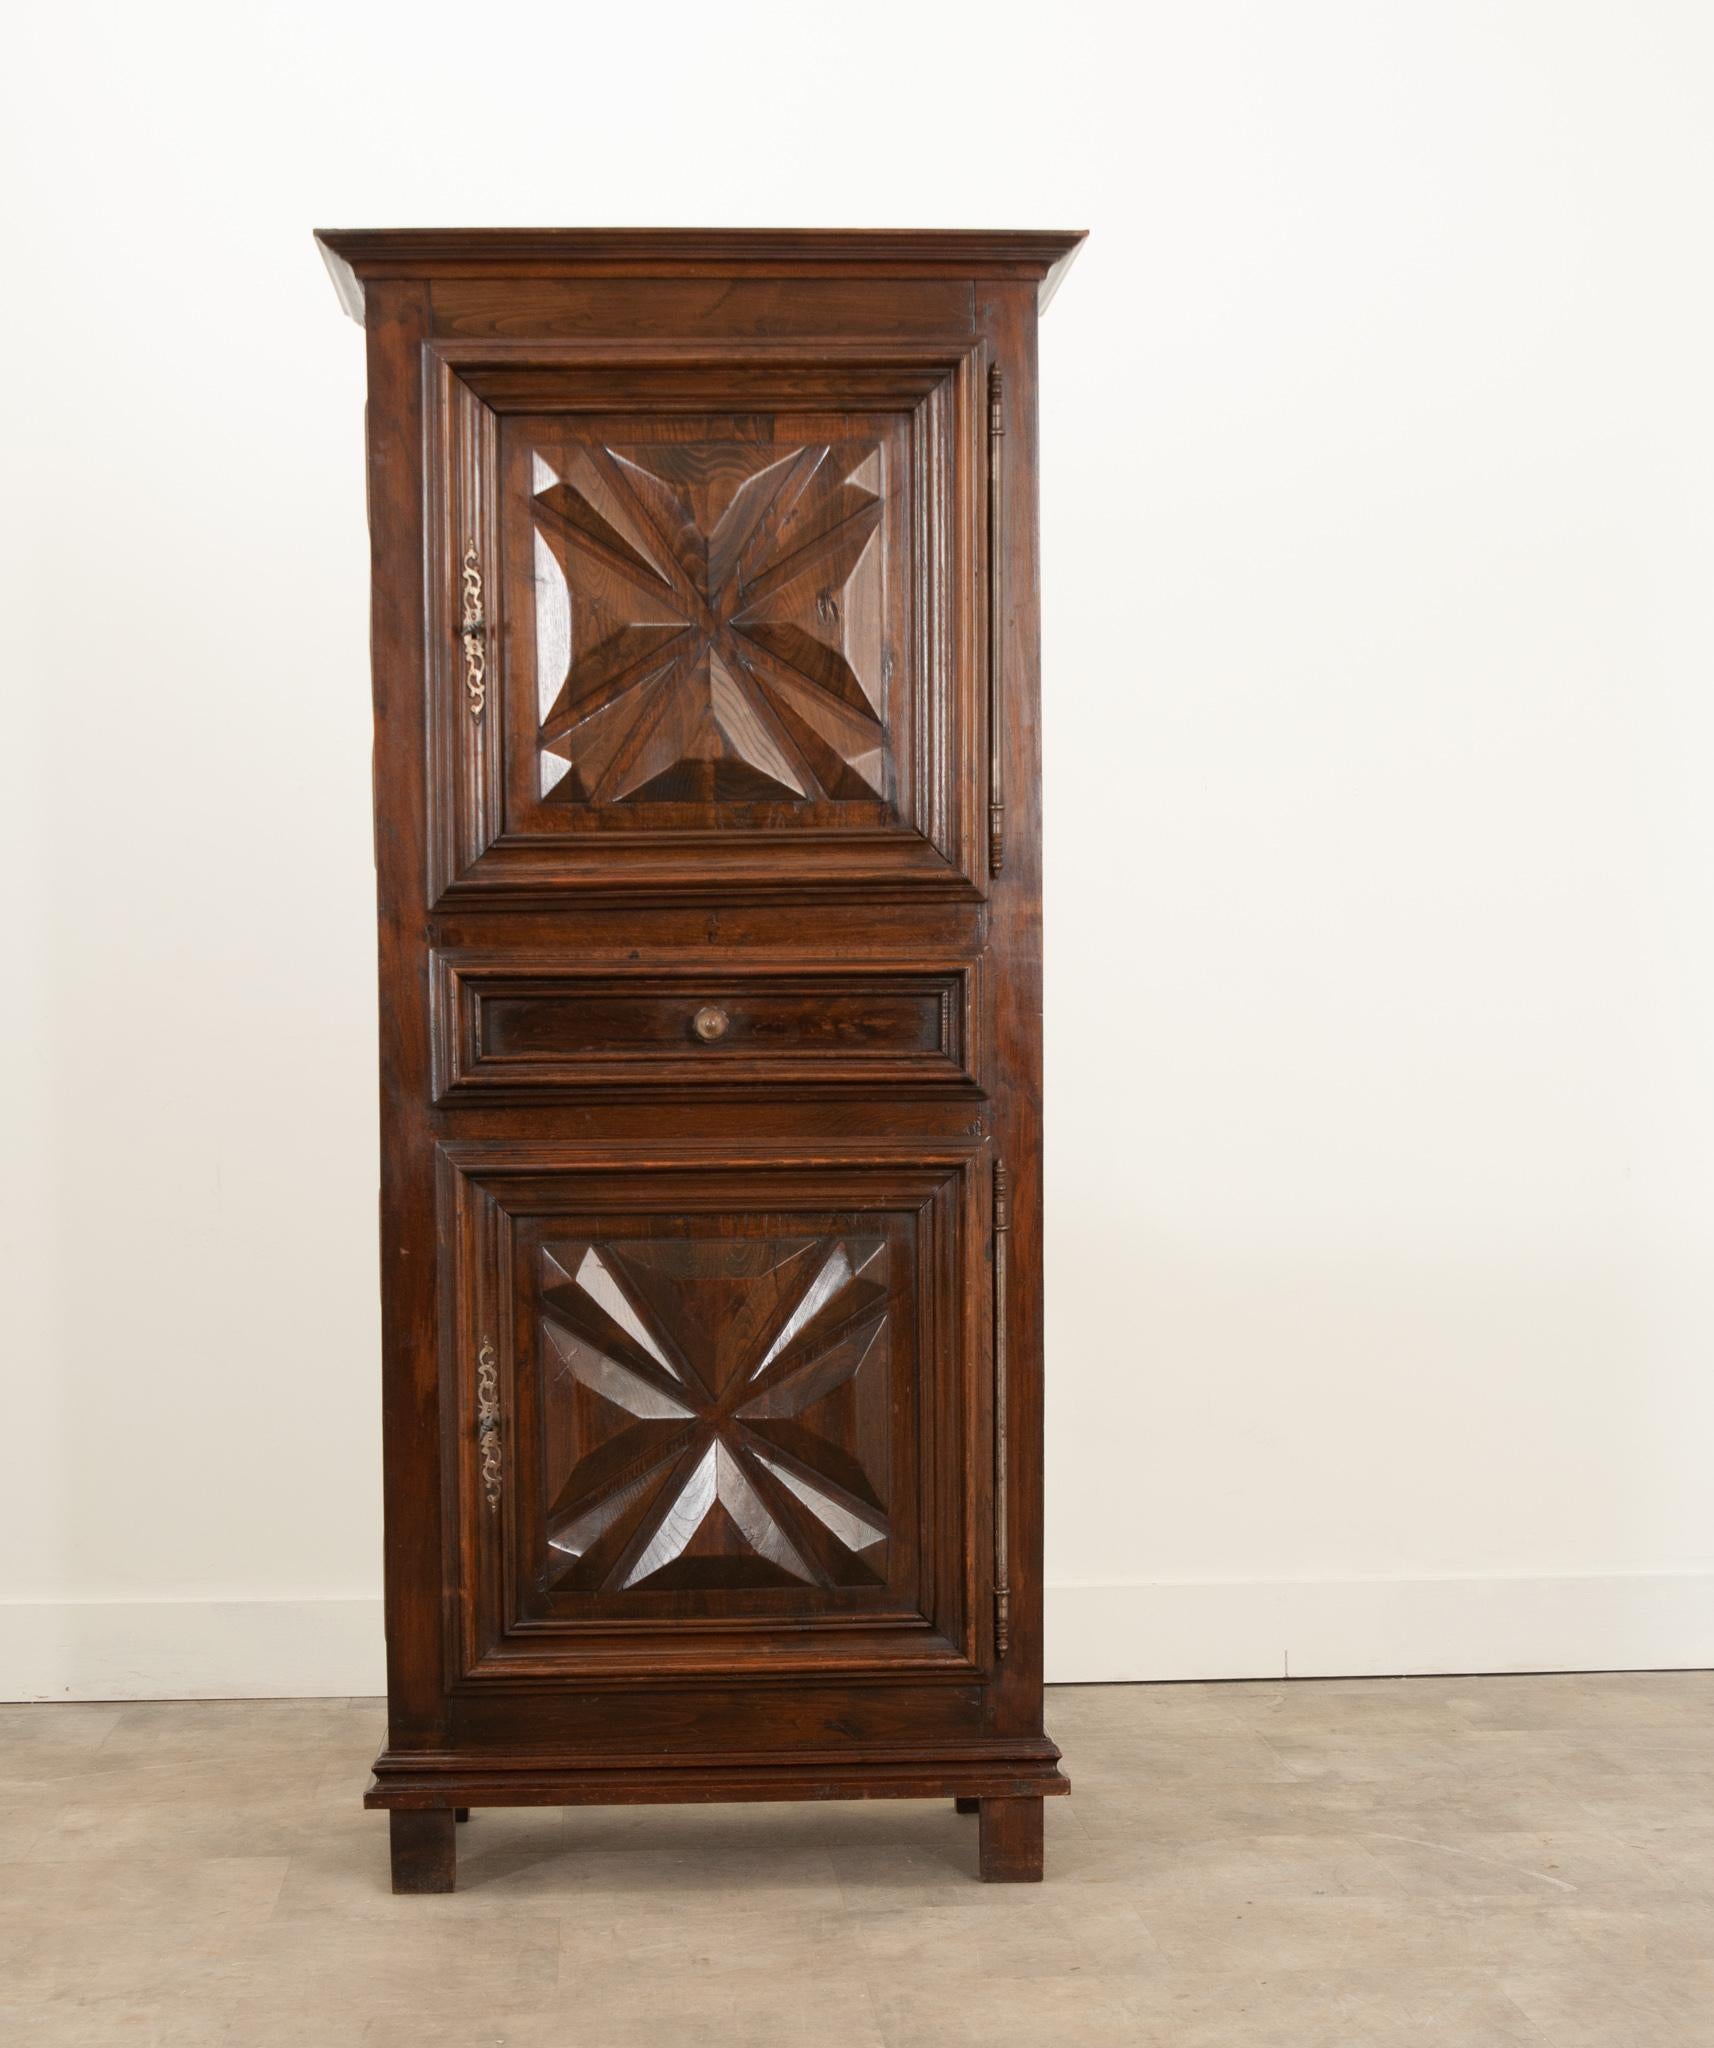 This stunning homme debout was hand carved in France during the 1800s and features sizable steel barrel hinges and hand cut escutcheons. Crafted from solid oak that’s gained a wonderful patina- the doors are thick with gem cut panels. Both doored